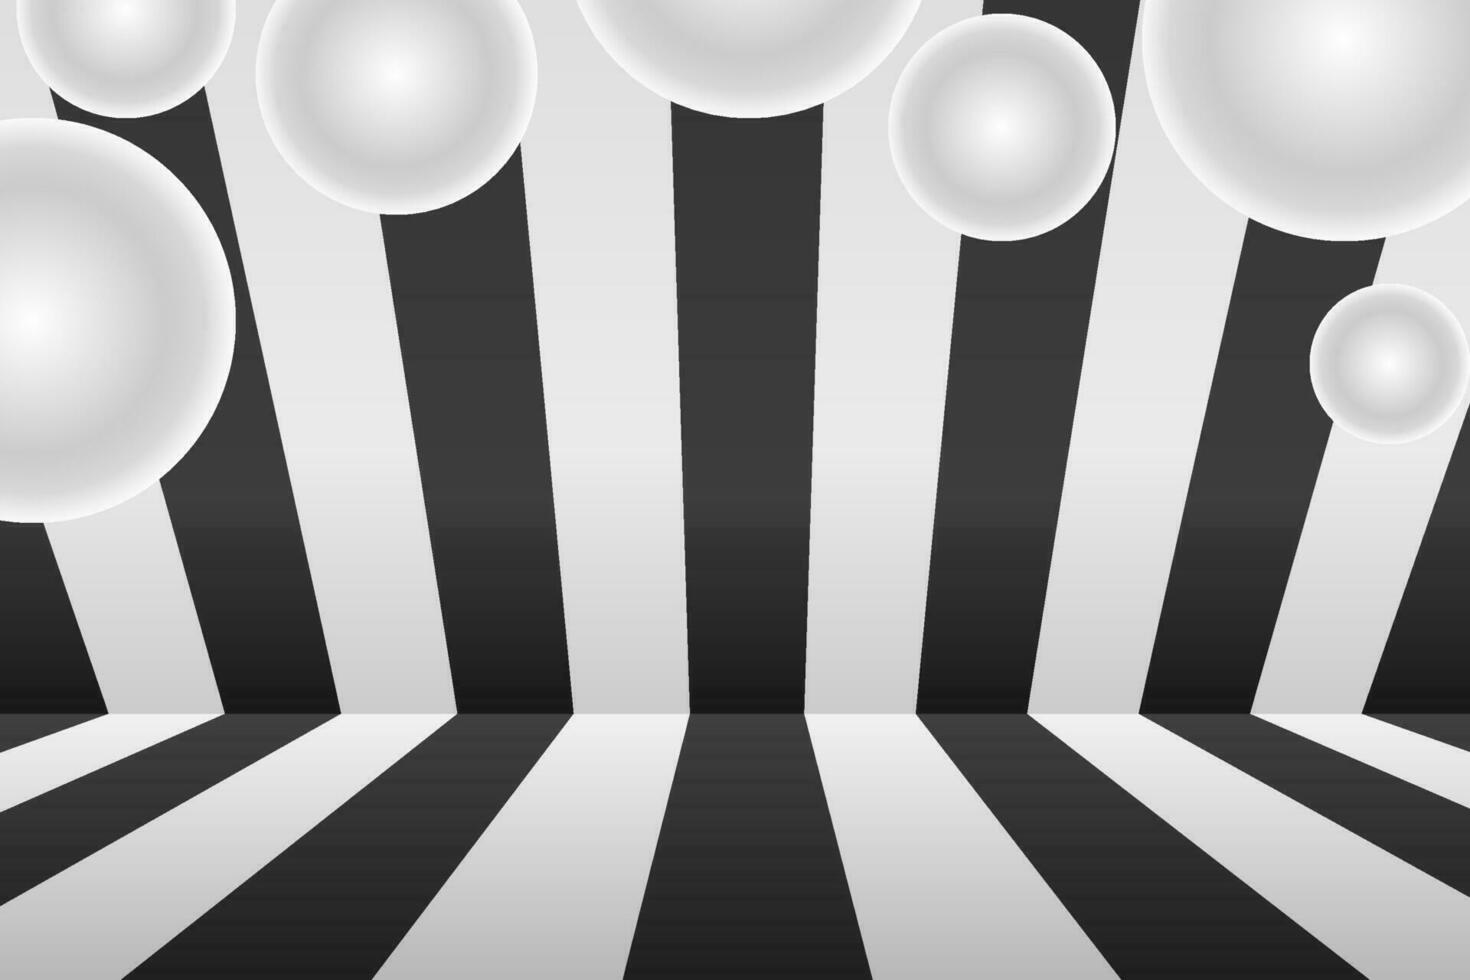 Black and white striped background for promotions or presentations. vector